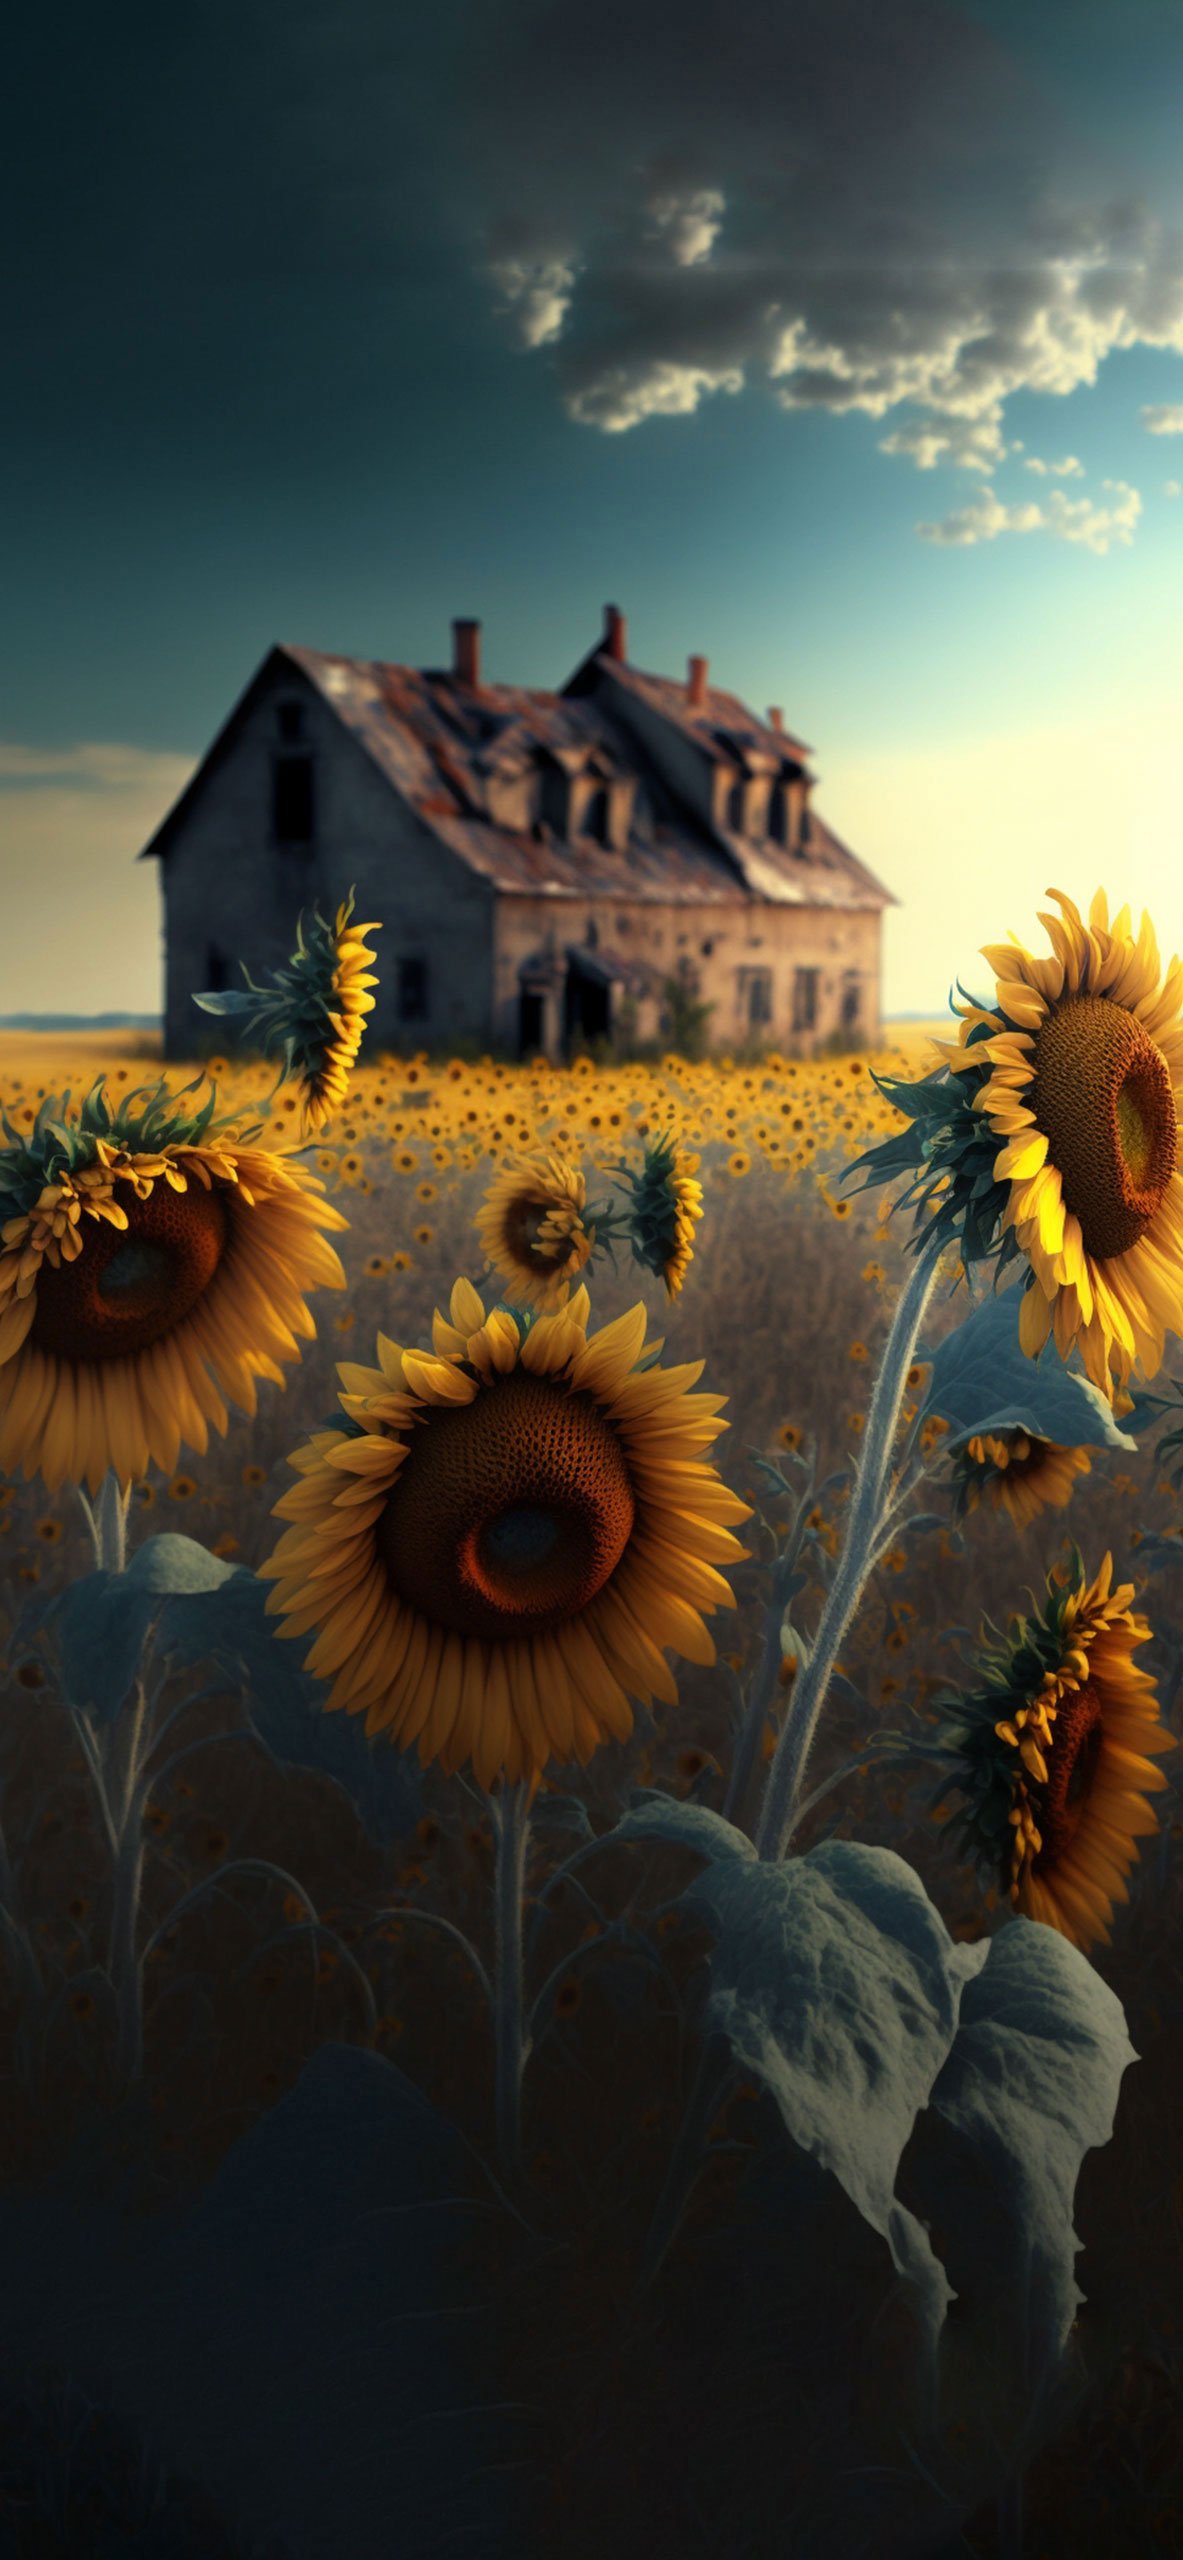 Sunflowers & Old House Wallpaper Wallpaper iPhone